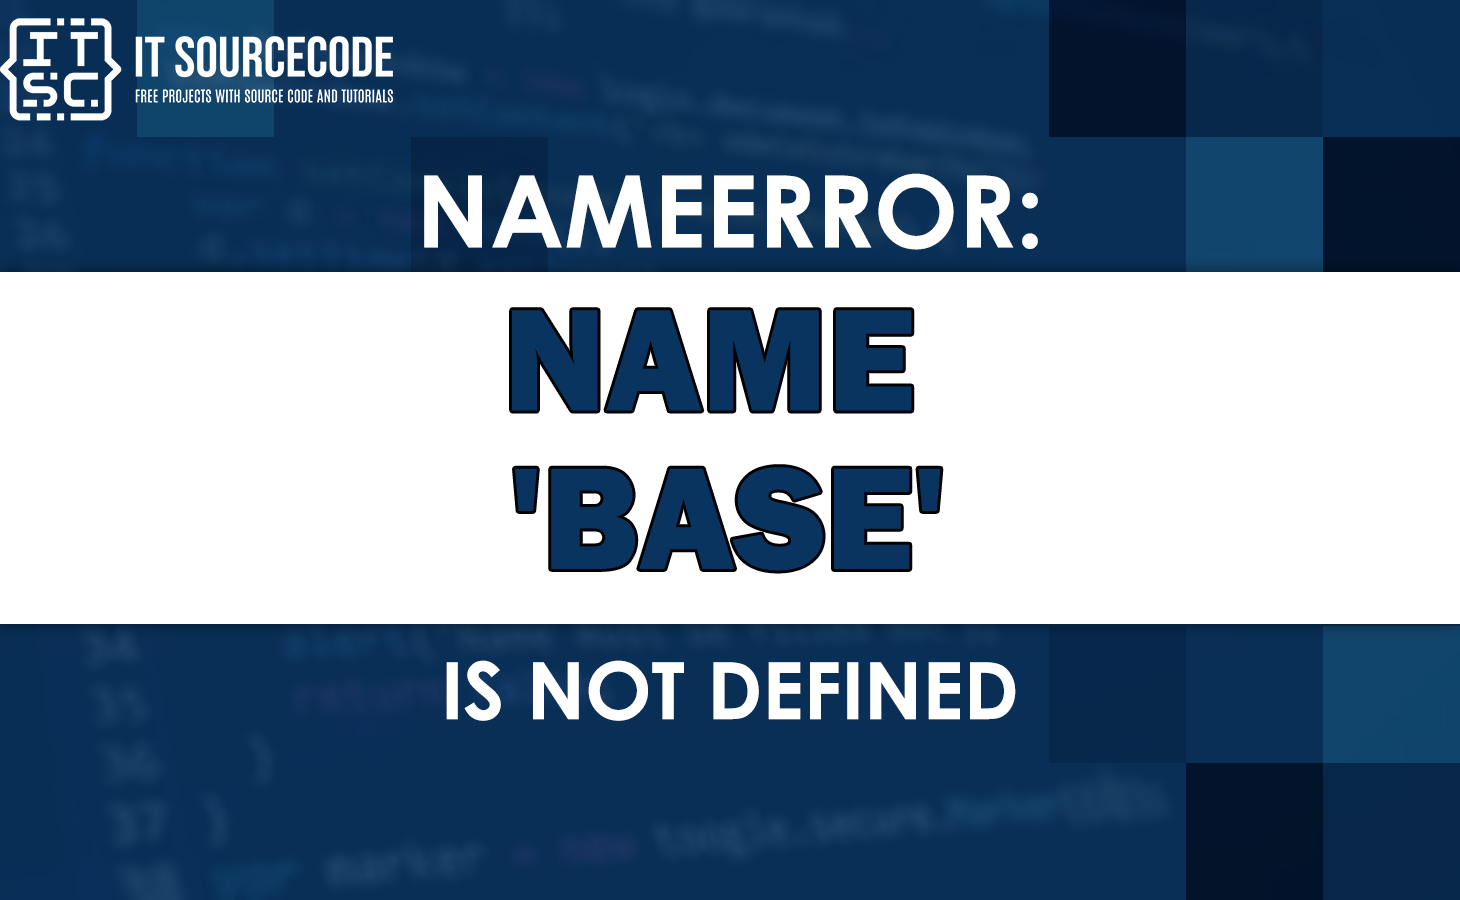 nameerror: name base is not defined